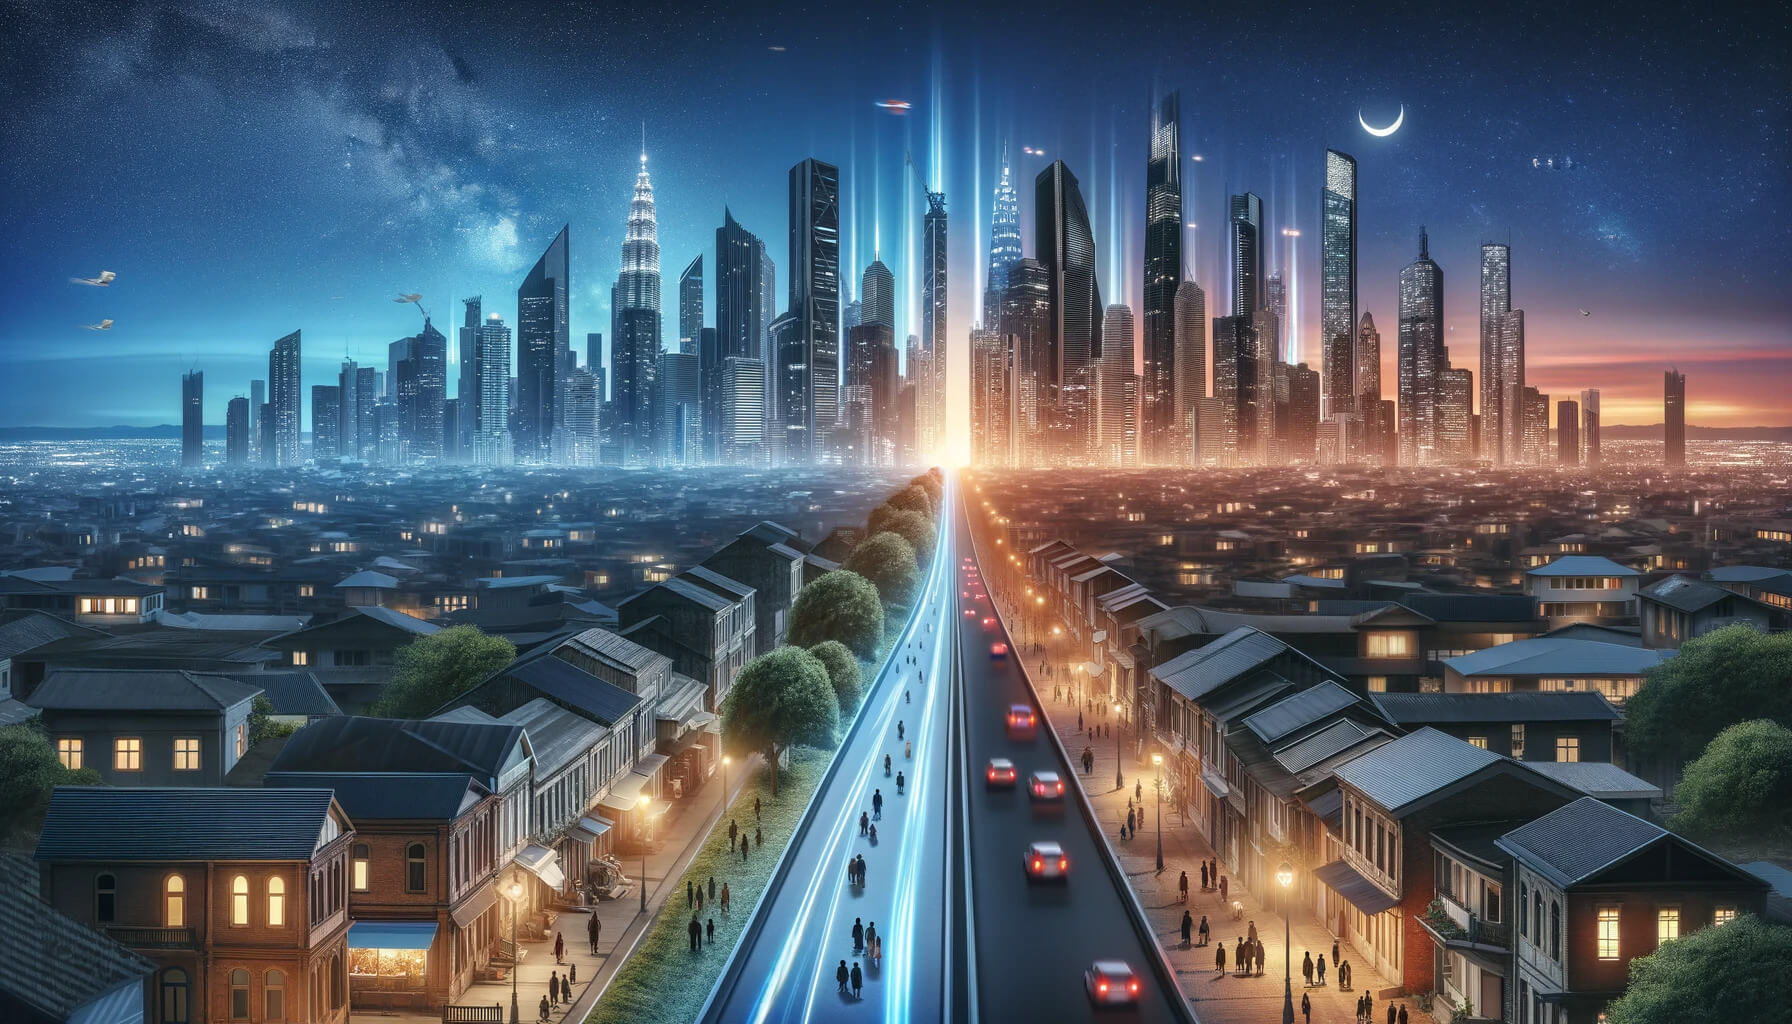 Cityscape evolves from old to new, from night to dawn, showing small traditional buildings and vehicles transitioning to large skyscrapers and flying vehicles, with tiny figures symbolizing the journey of business leaders through digital transformation.